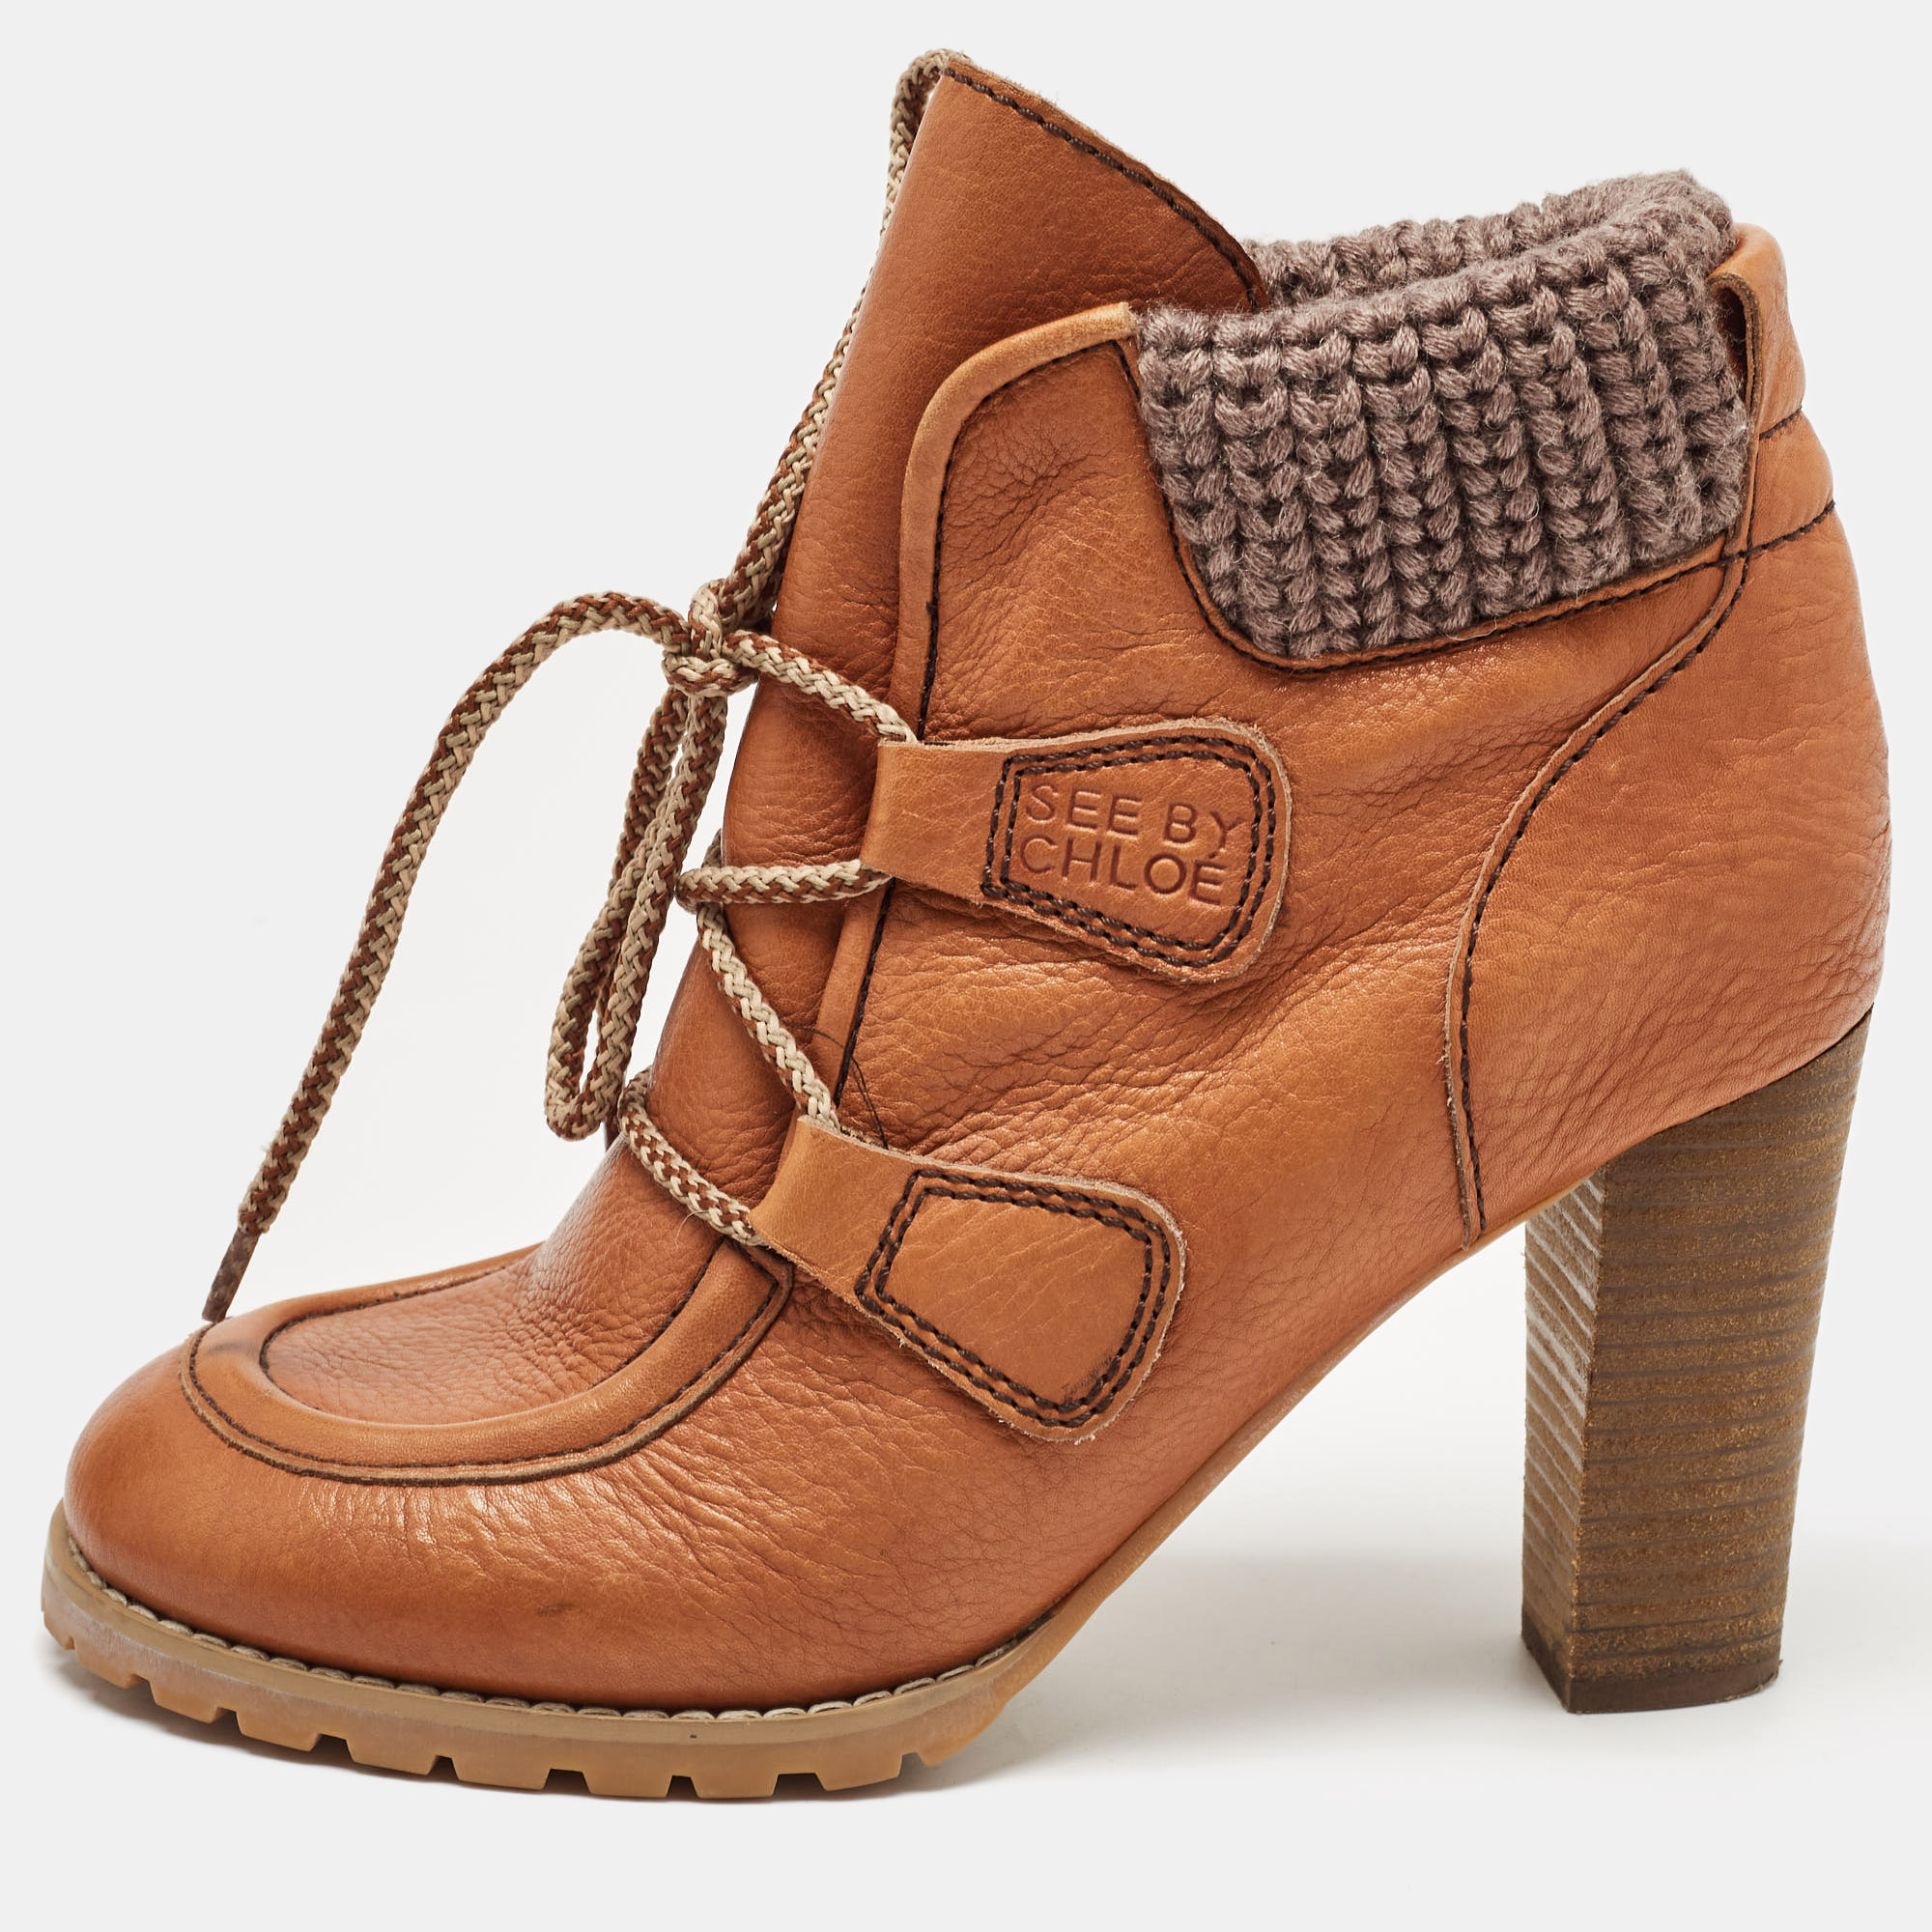 See by chloe brown leather lace up ankle boots size 37